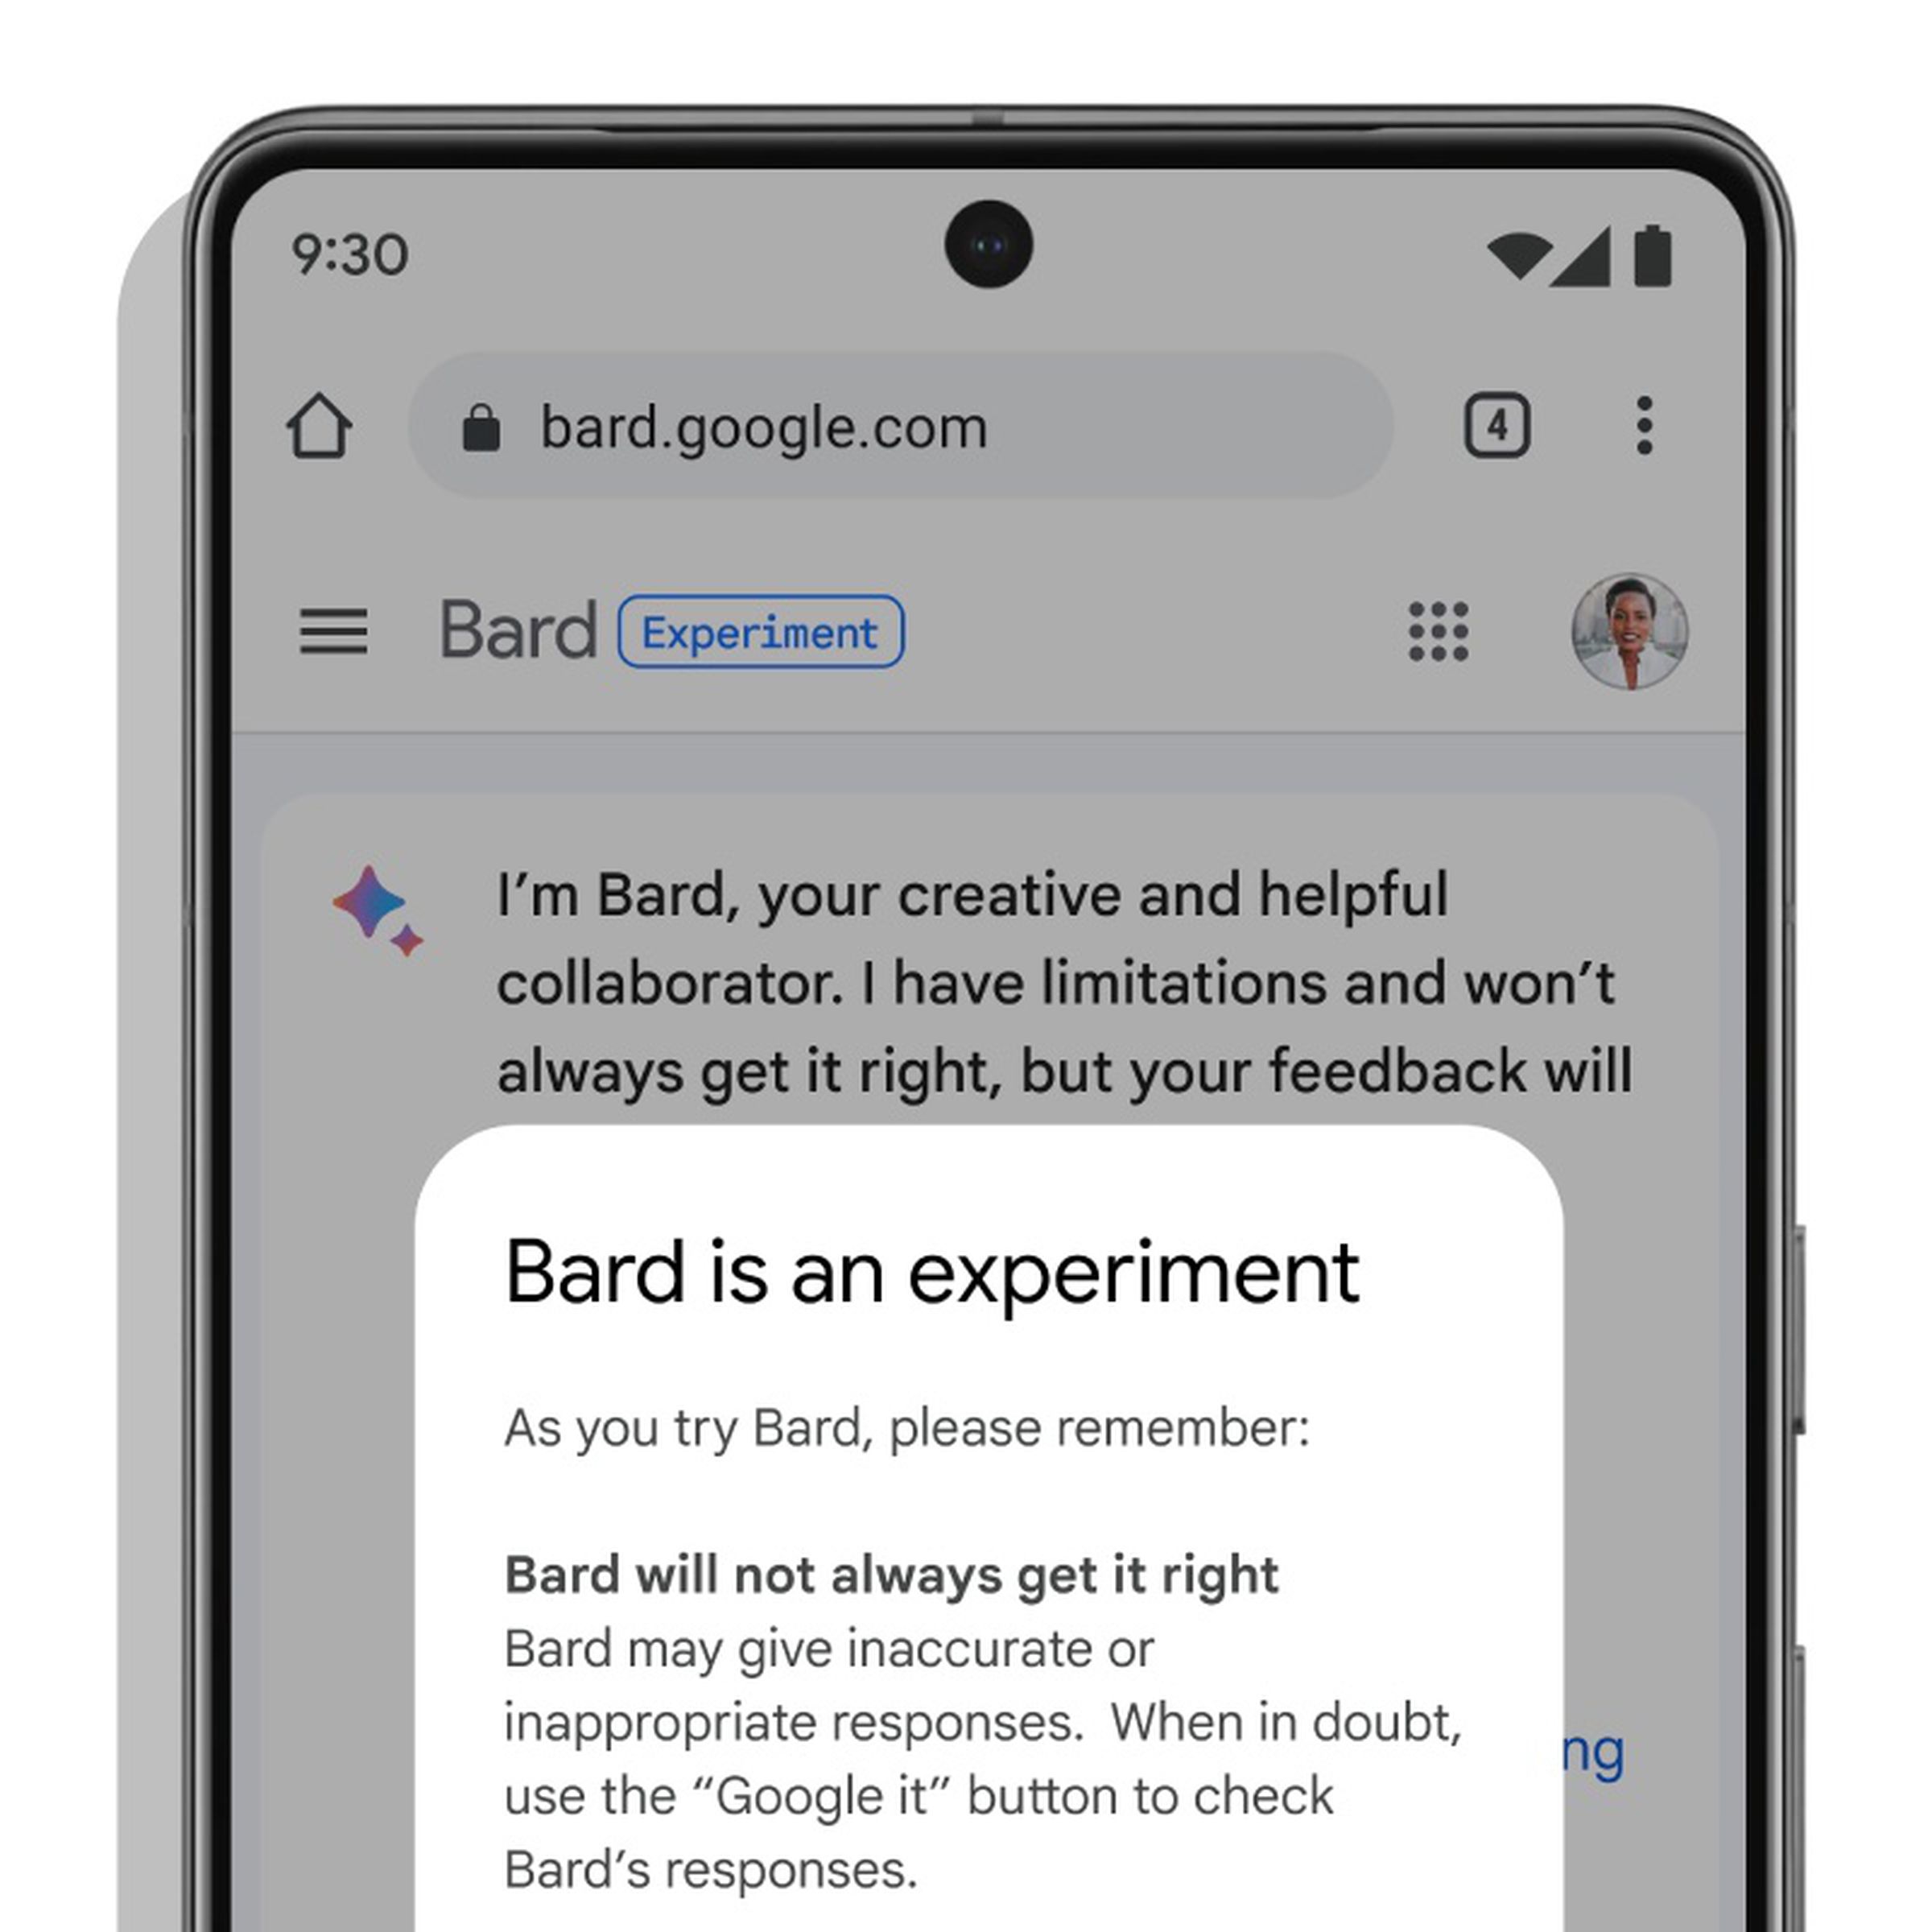 A screenshot showing Bard’s mobile UI with a warning notice: “Bard is an experiment.”